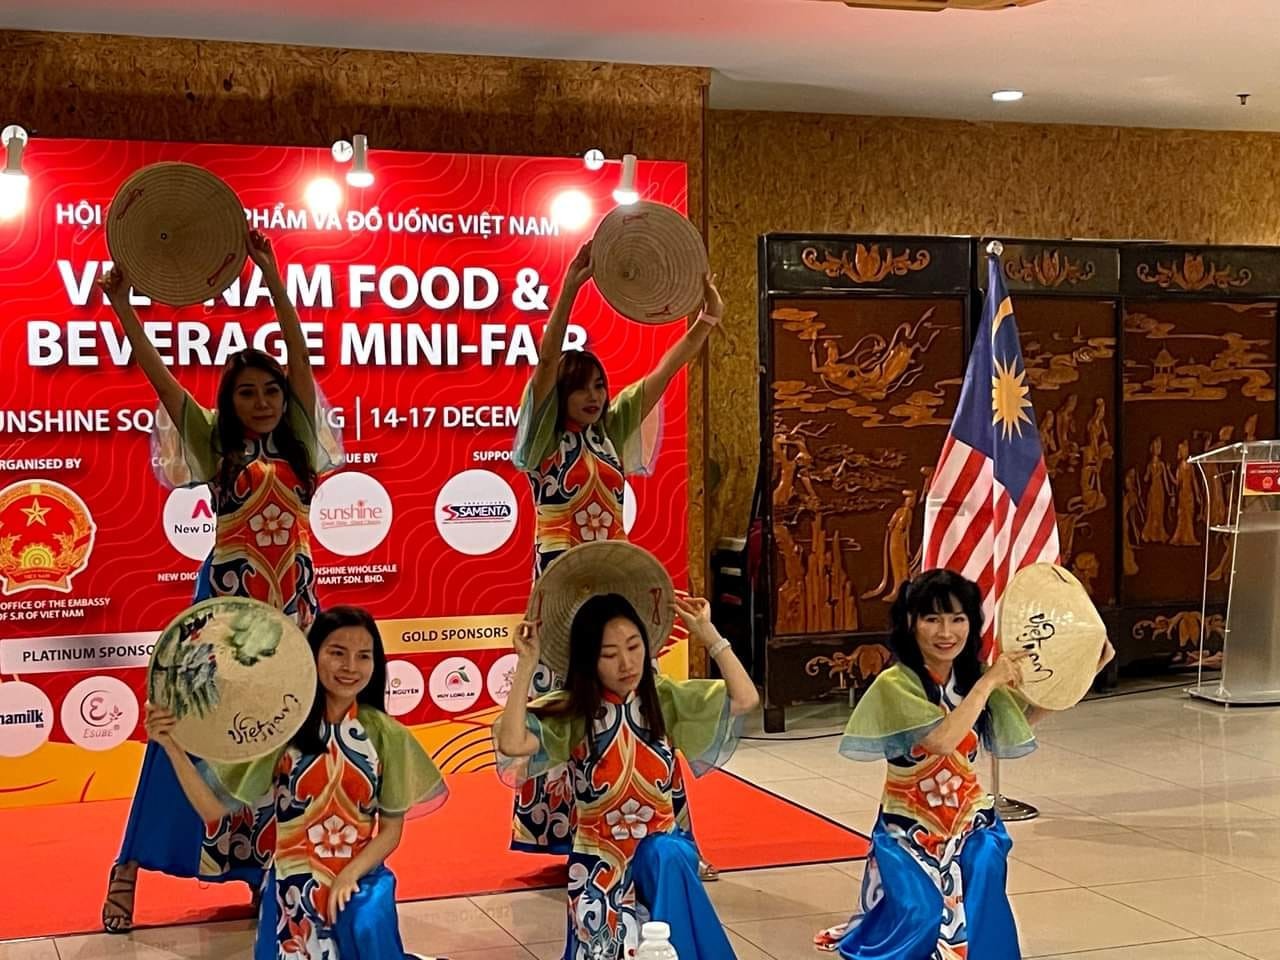 The First Vietnam Food and Beverage Mini Fair in Penang (Malaysia) Takes Place